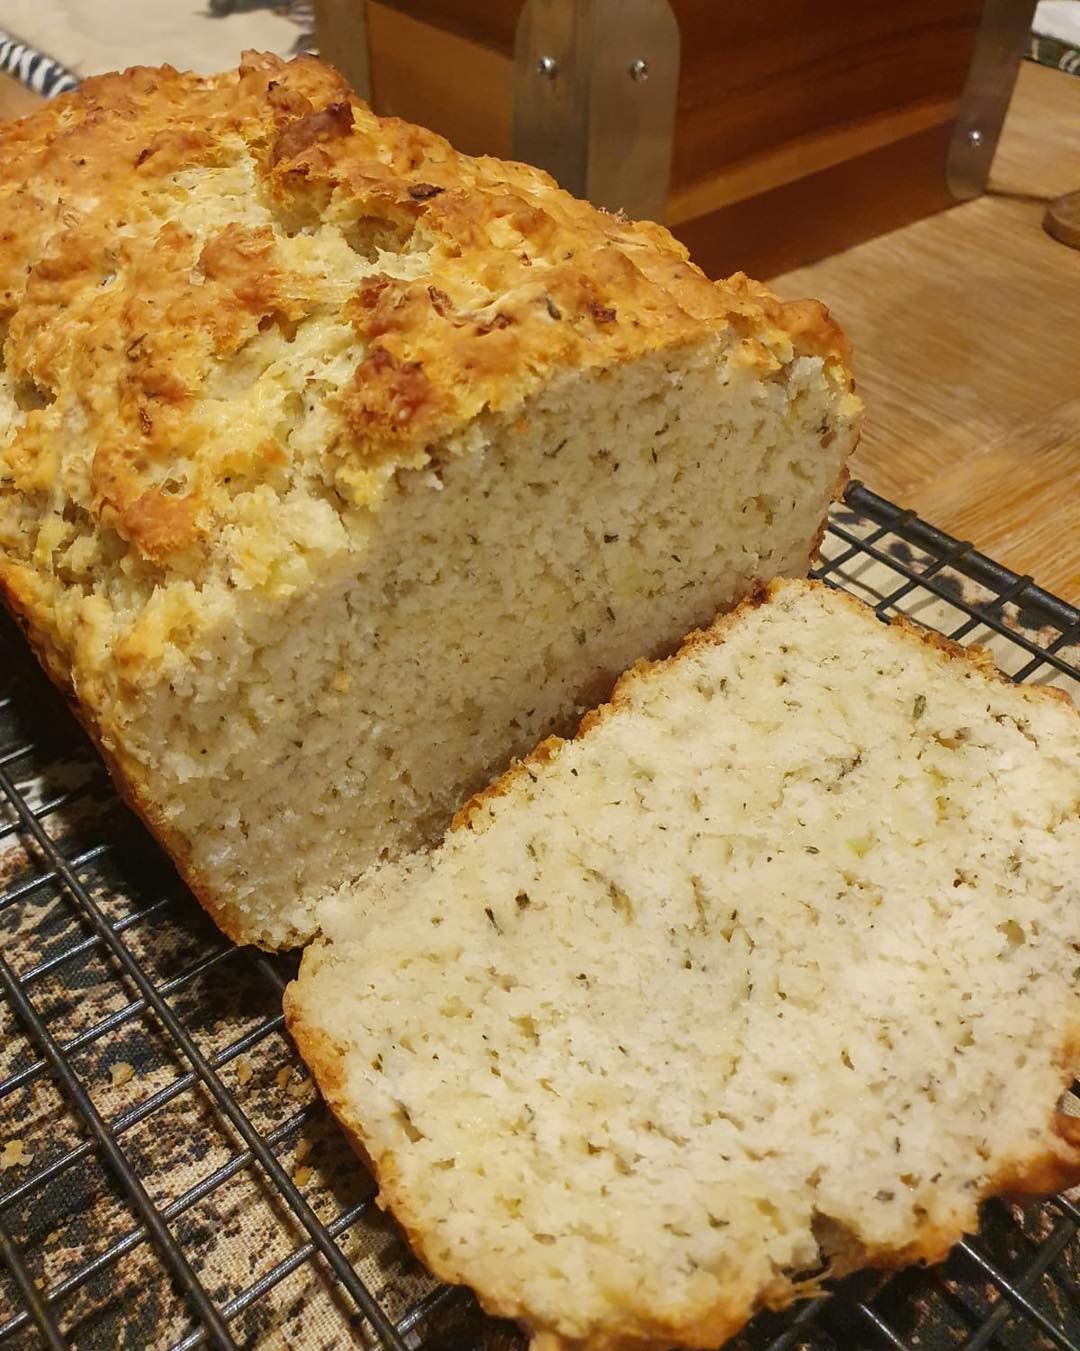 Oregano Garlic and Sage Beer Bread the easiest bread for any occasion!

Thanks for sharing - what did Aysia say about this one Tarryn ?

🤣🤣🤣🤣🤣🤣

#beer #bread #beerbread #flouranddoughnz #kidswhobake #mumswhobake #bakingmums #nzmum #ausmum #smal